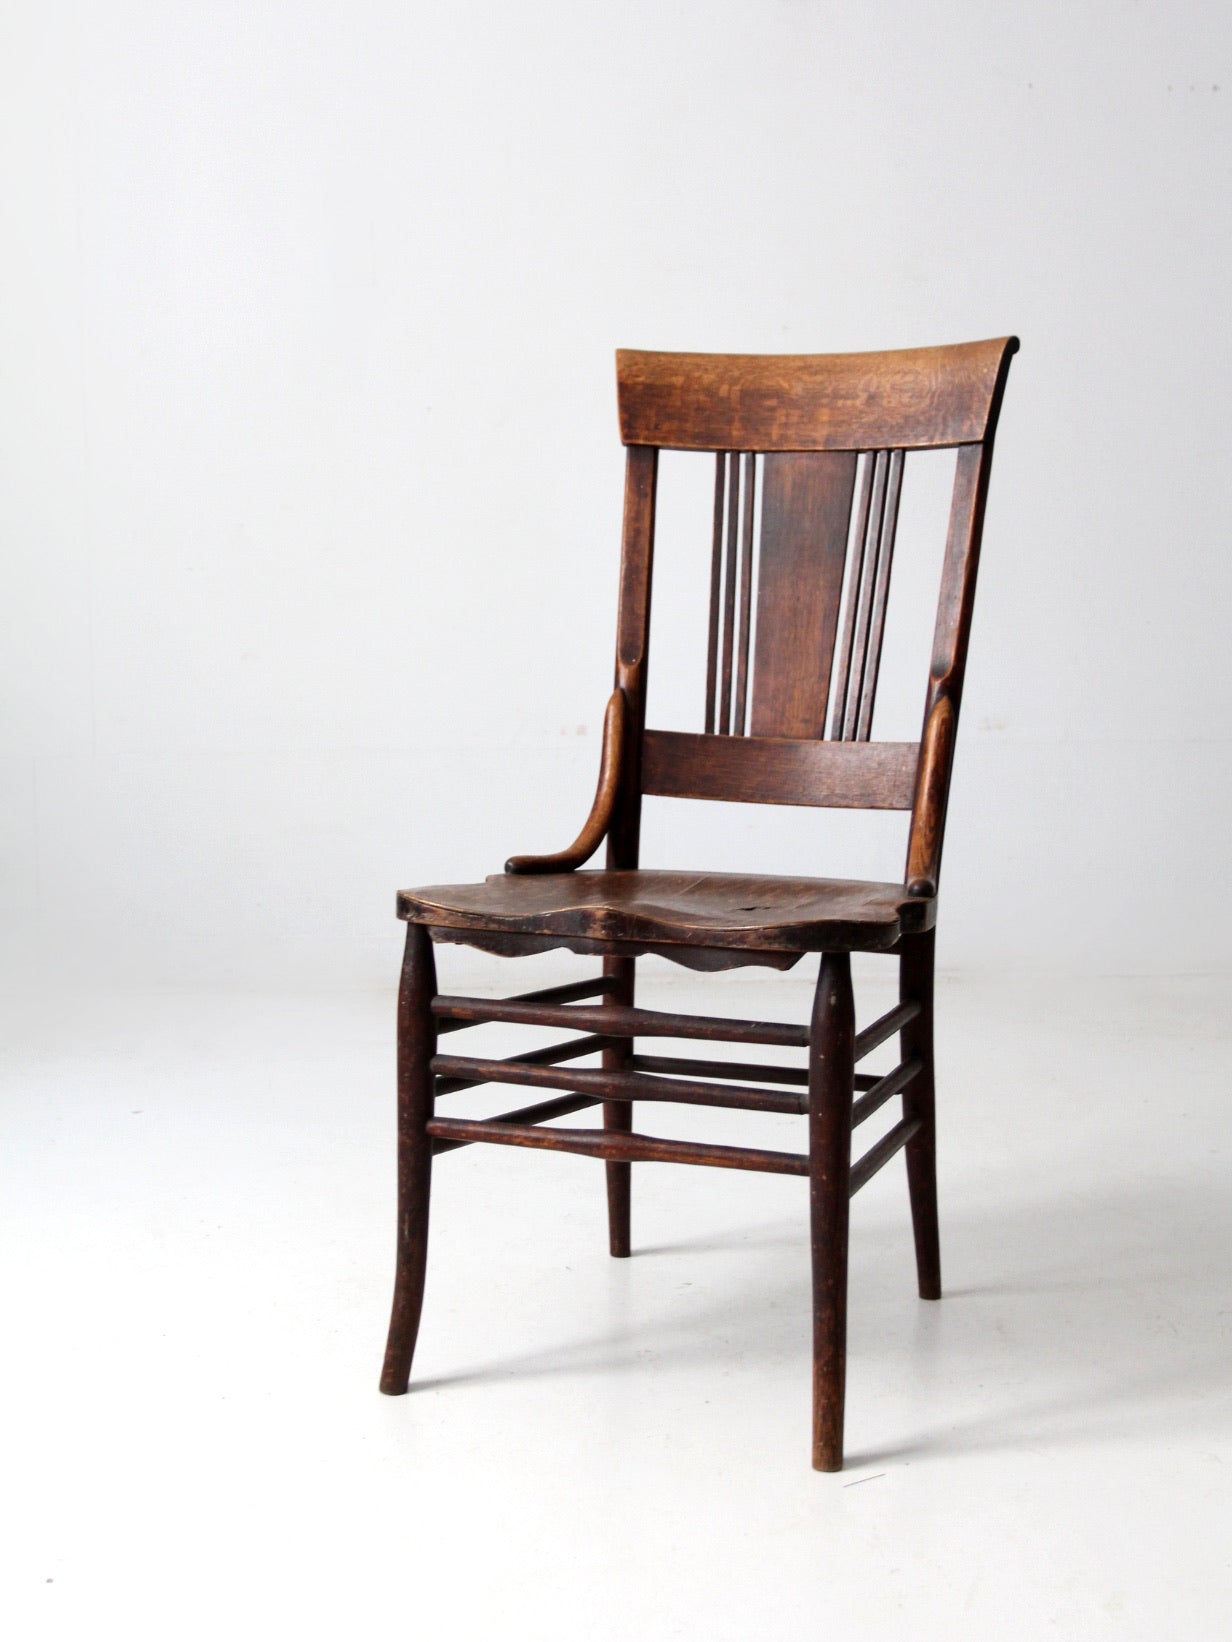 antique side chair